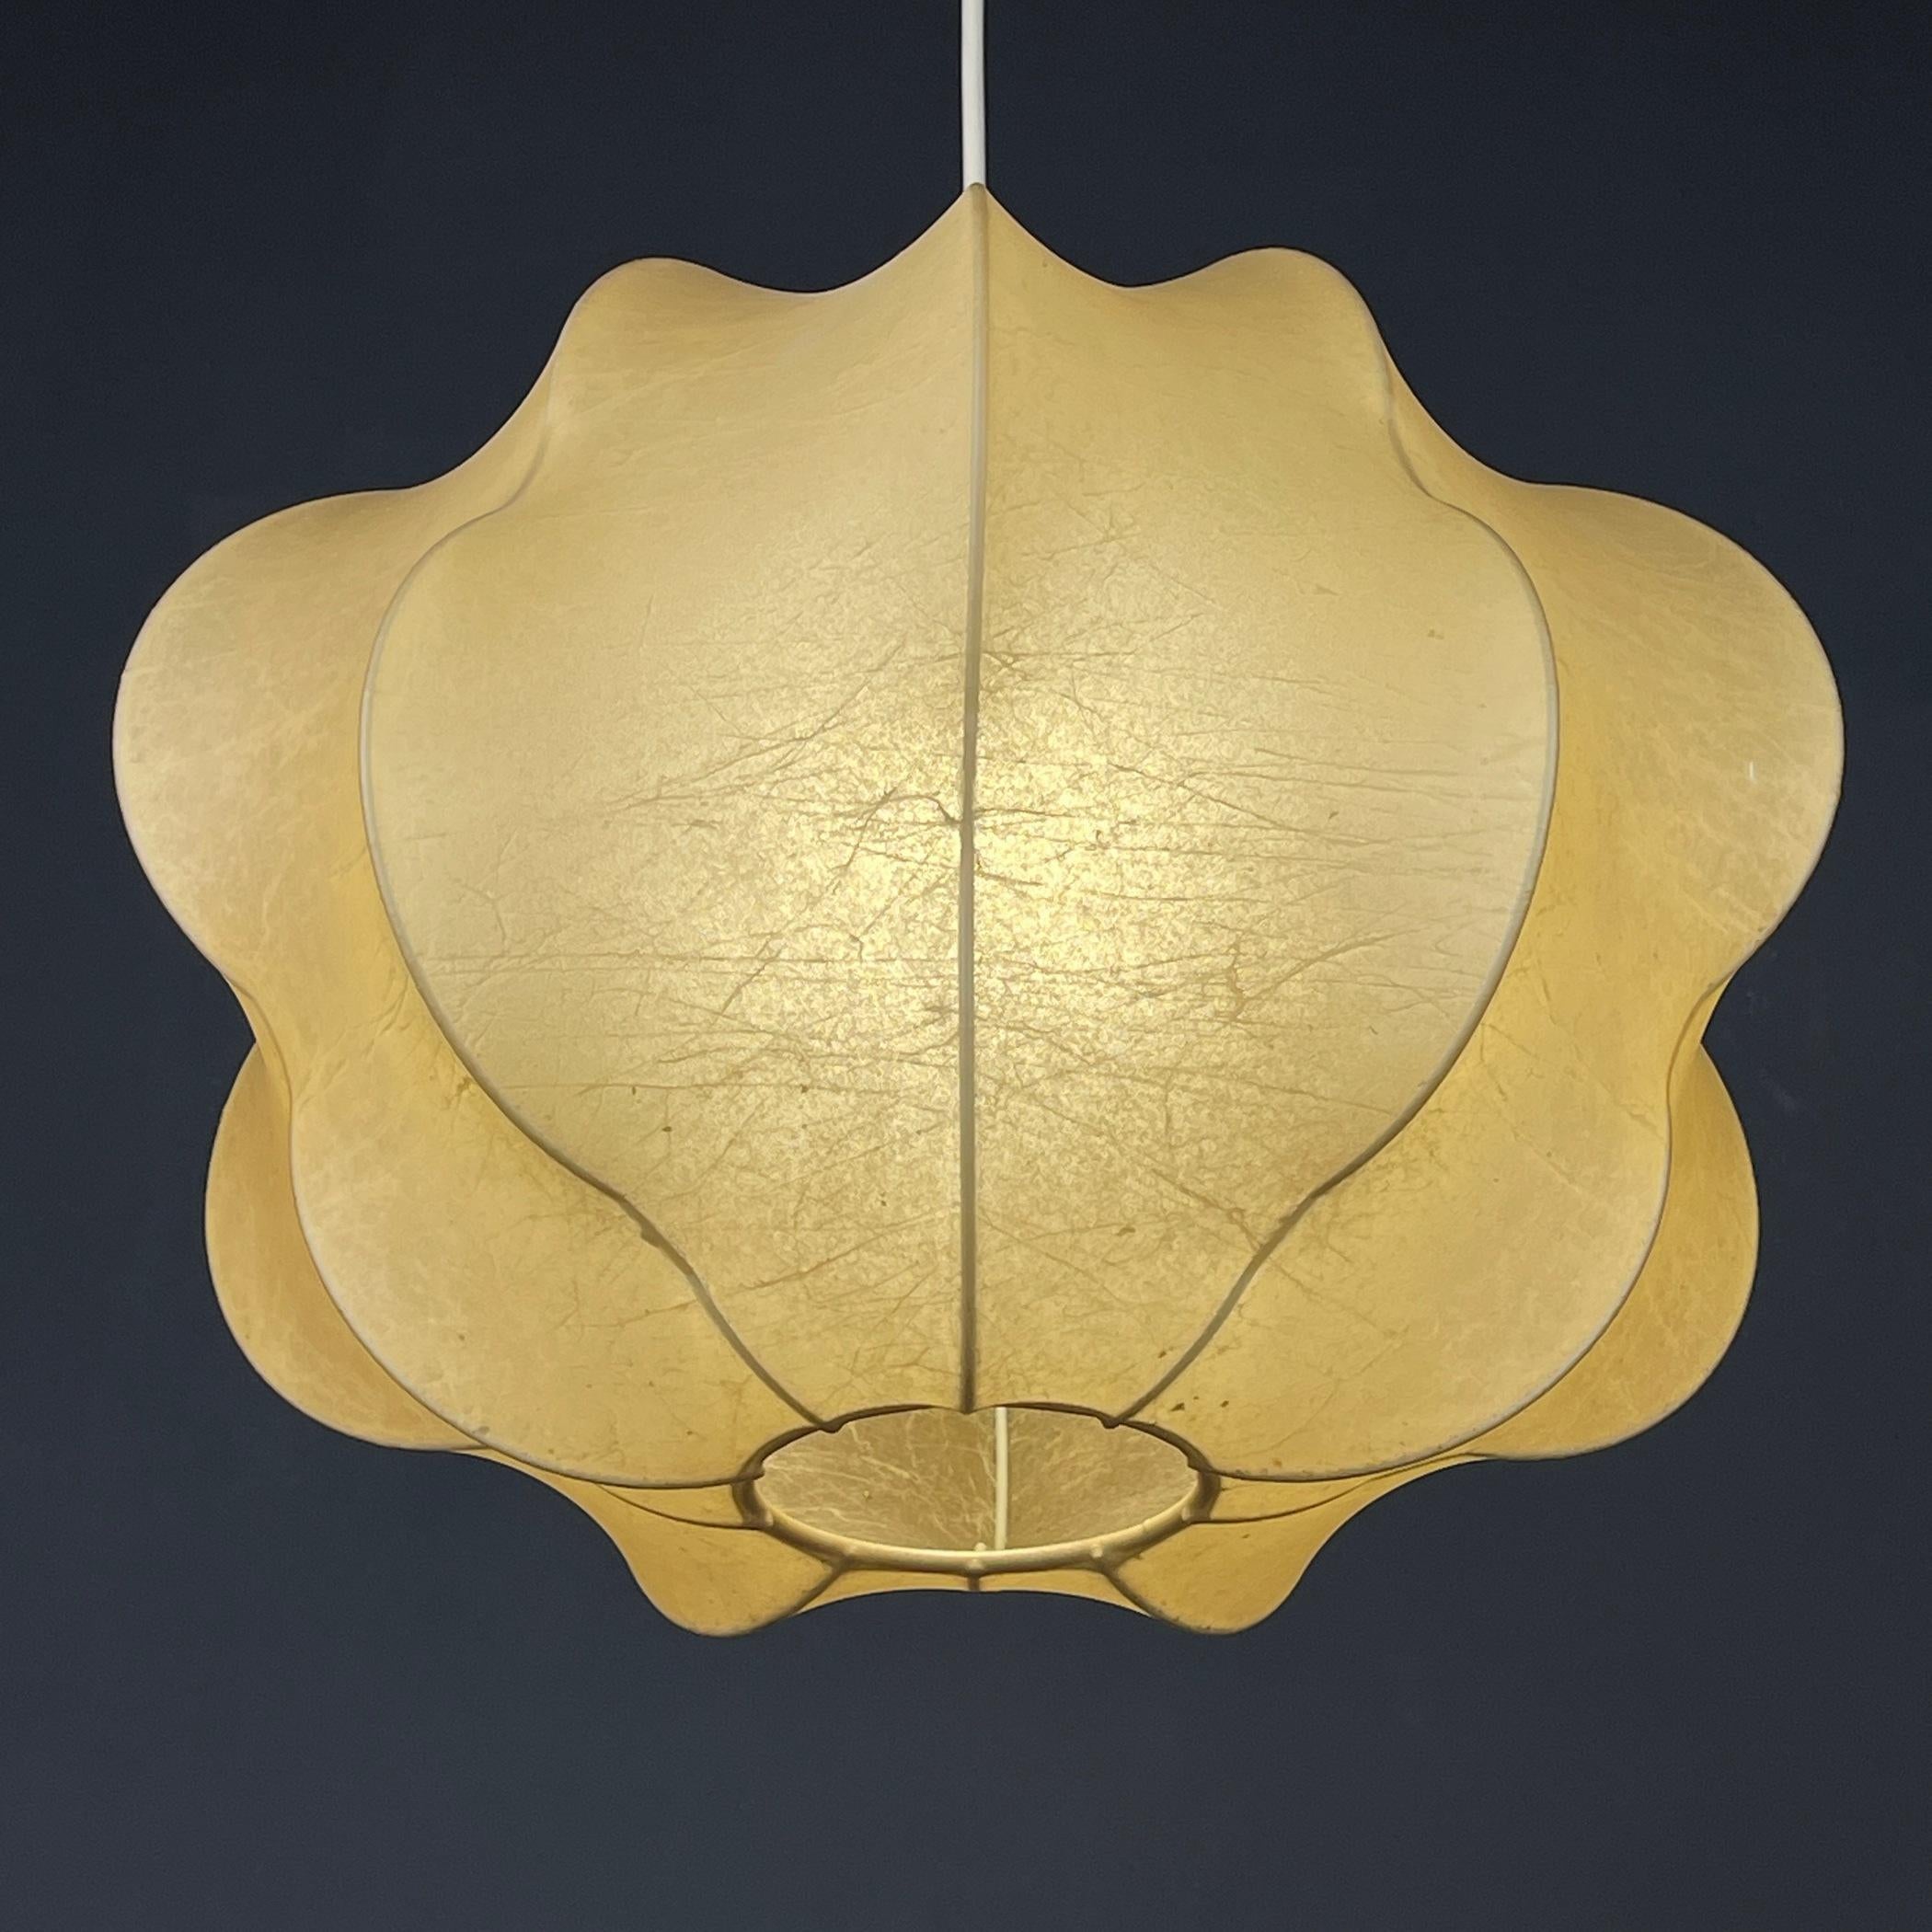 Step into the captivating world of Italian Mid-Century Modern design with the Nuvola cocoon chandelier by Tobia Scarpa for Flos in 1962. This light suspension model boasts an internal metal rod frame, gently embraced by a cocoon covering. Crafted by